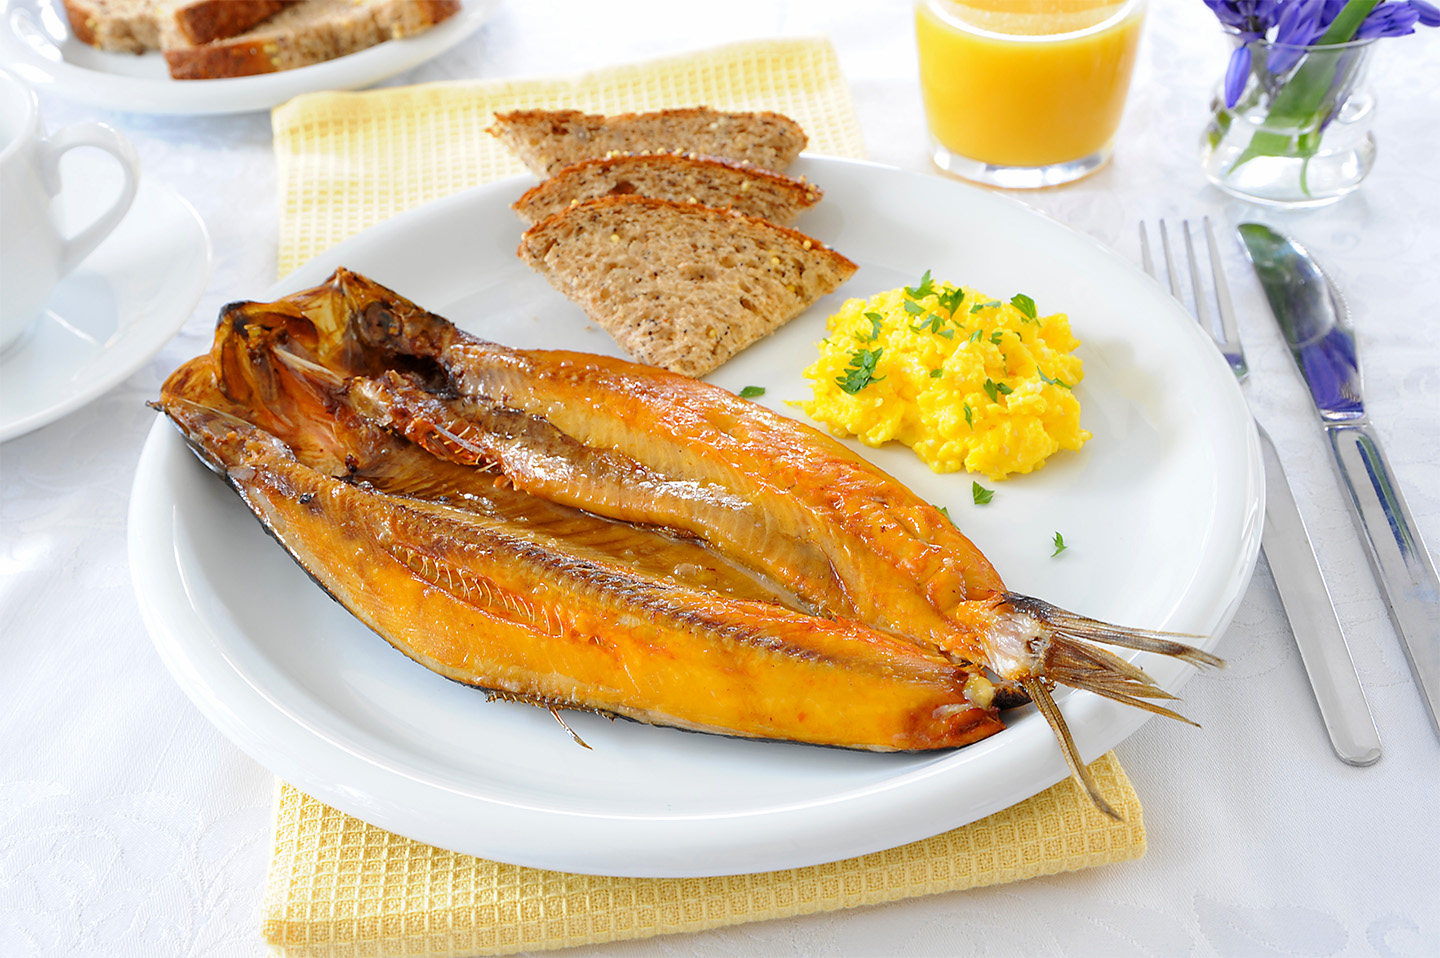 Kippers - Whole